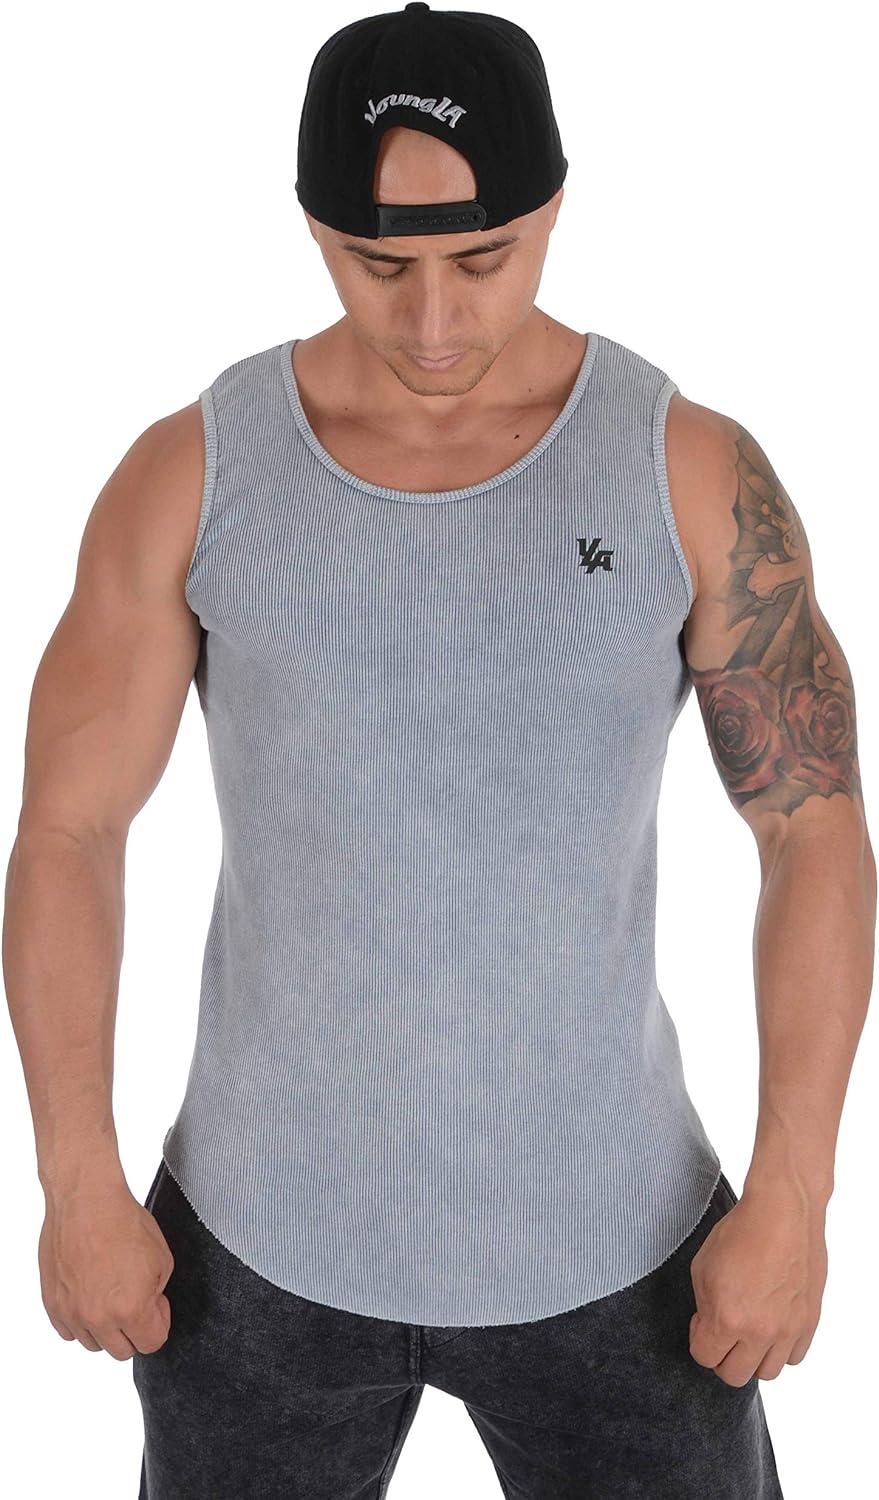 YoungLA Elongated Tank Tops for Men, Workout Muscle Gym Shirts, Bodybuilding Stringers